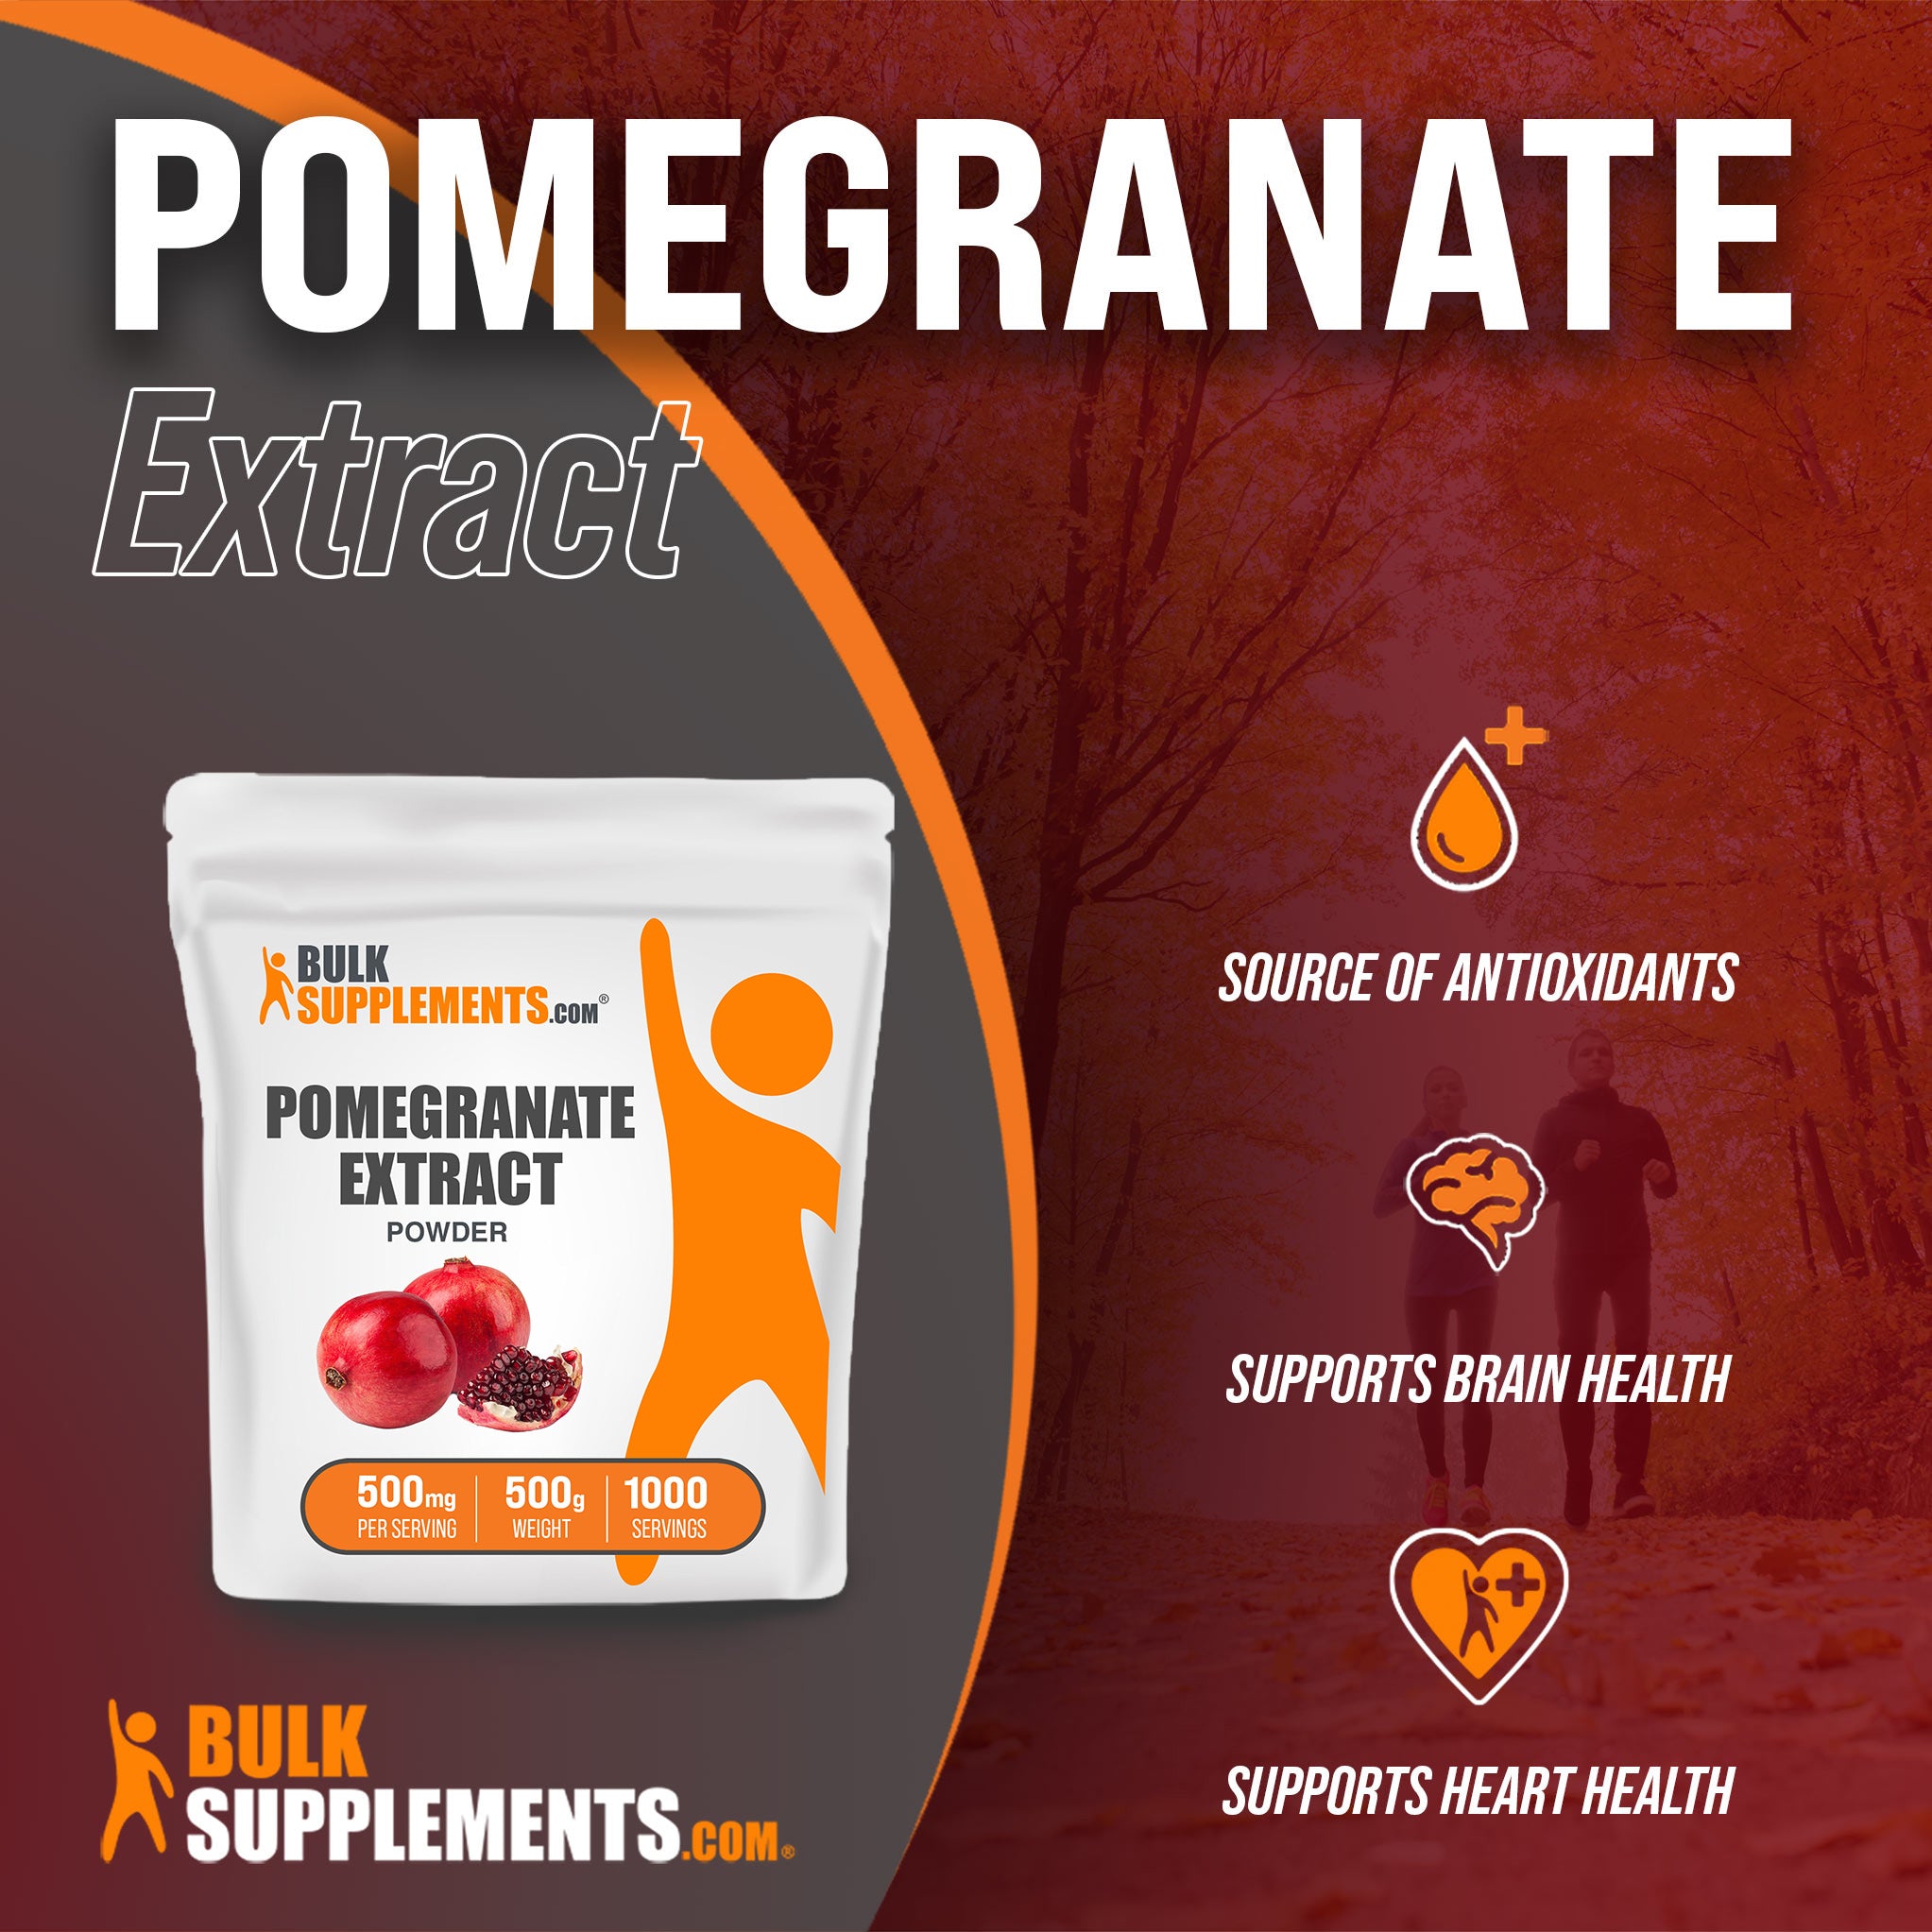 Benefits of Pomegranate Extract: source of antioxidants, supports brain health, supports heart health